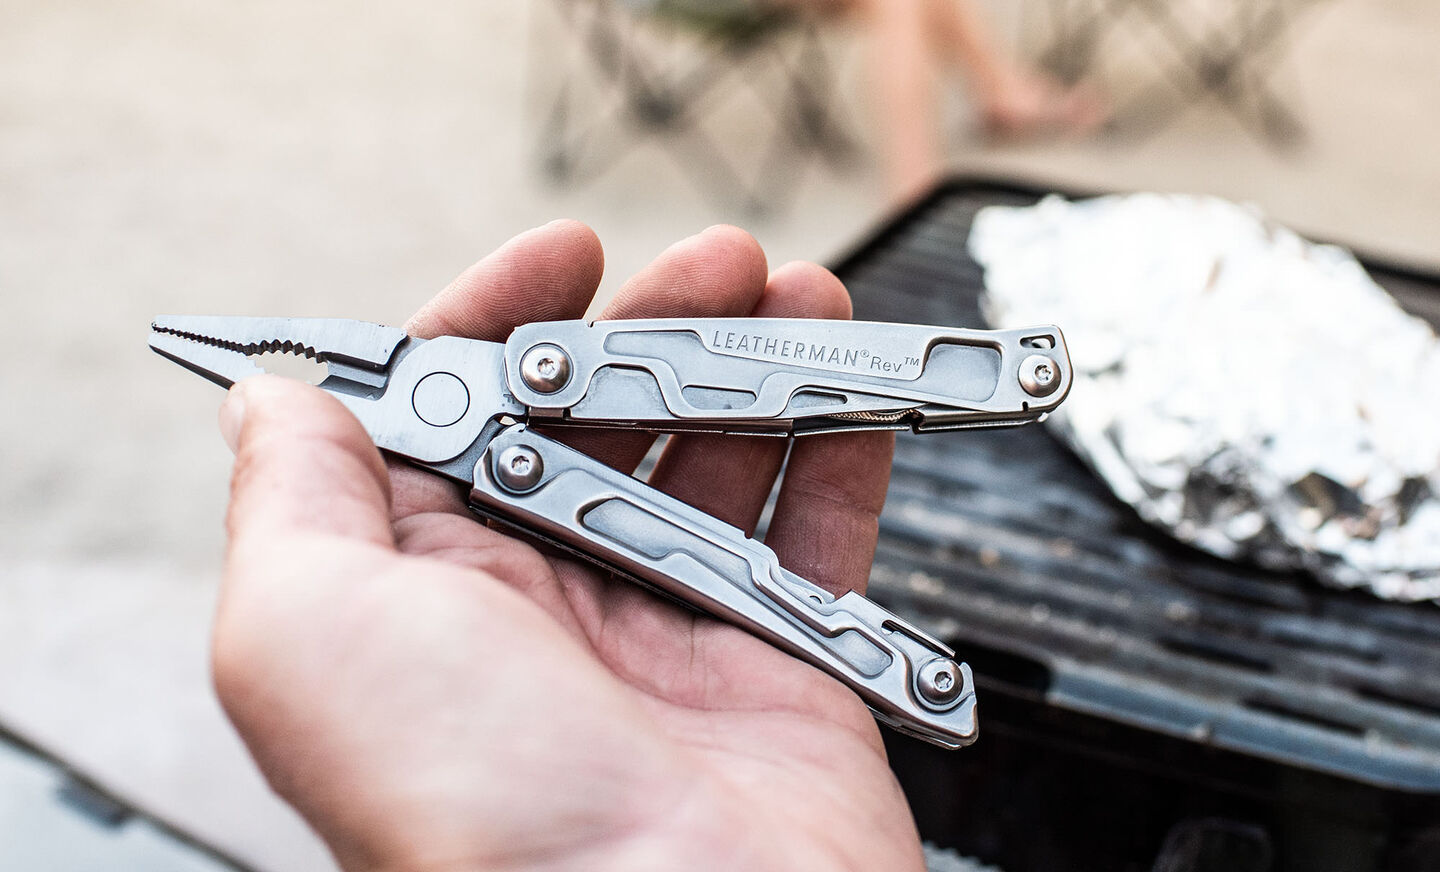 Leatherman Rev in a hand